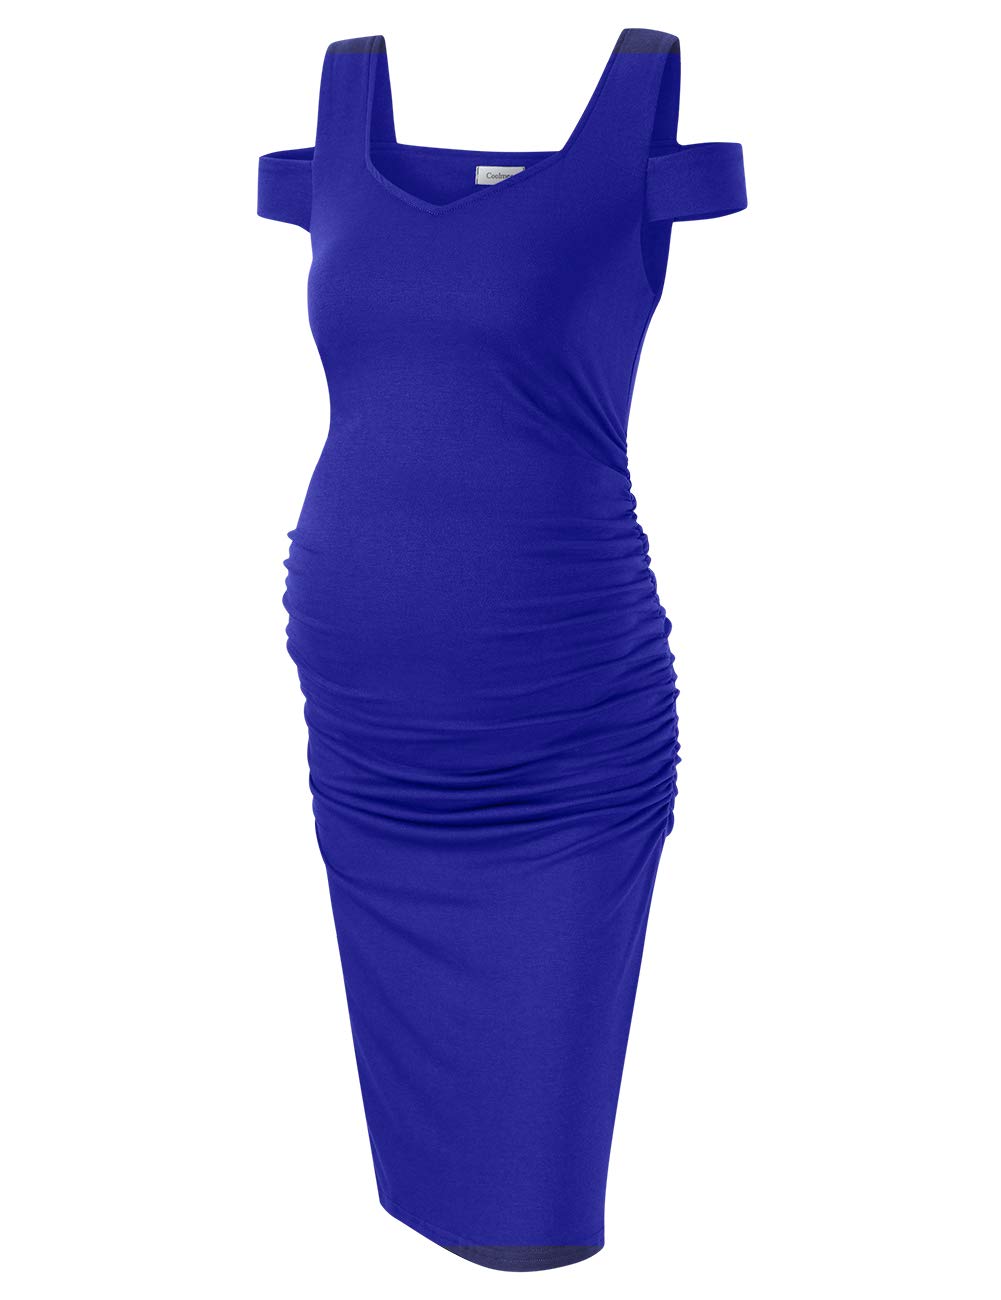 Maternity Dress Women's Casual V Neck Sleeveless Solid Color Ruched Knee-Length Maternity Dresses